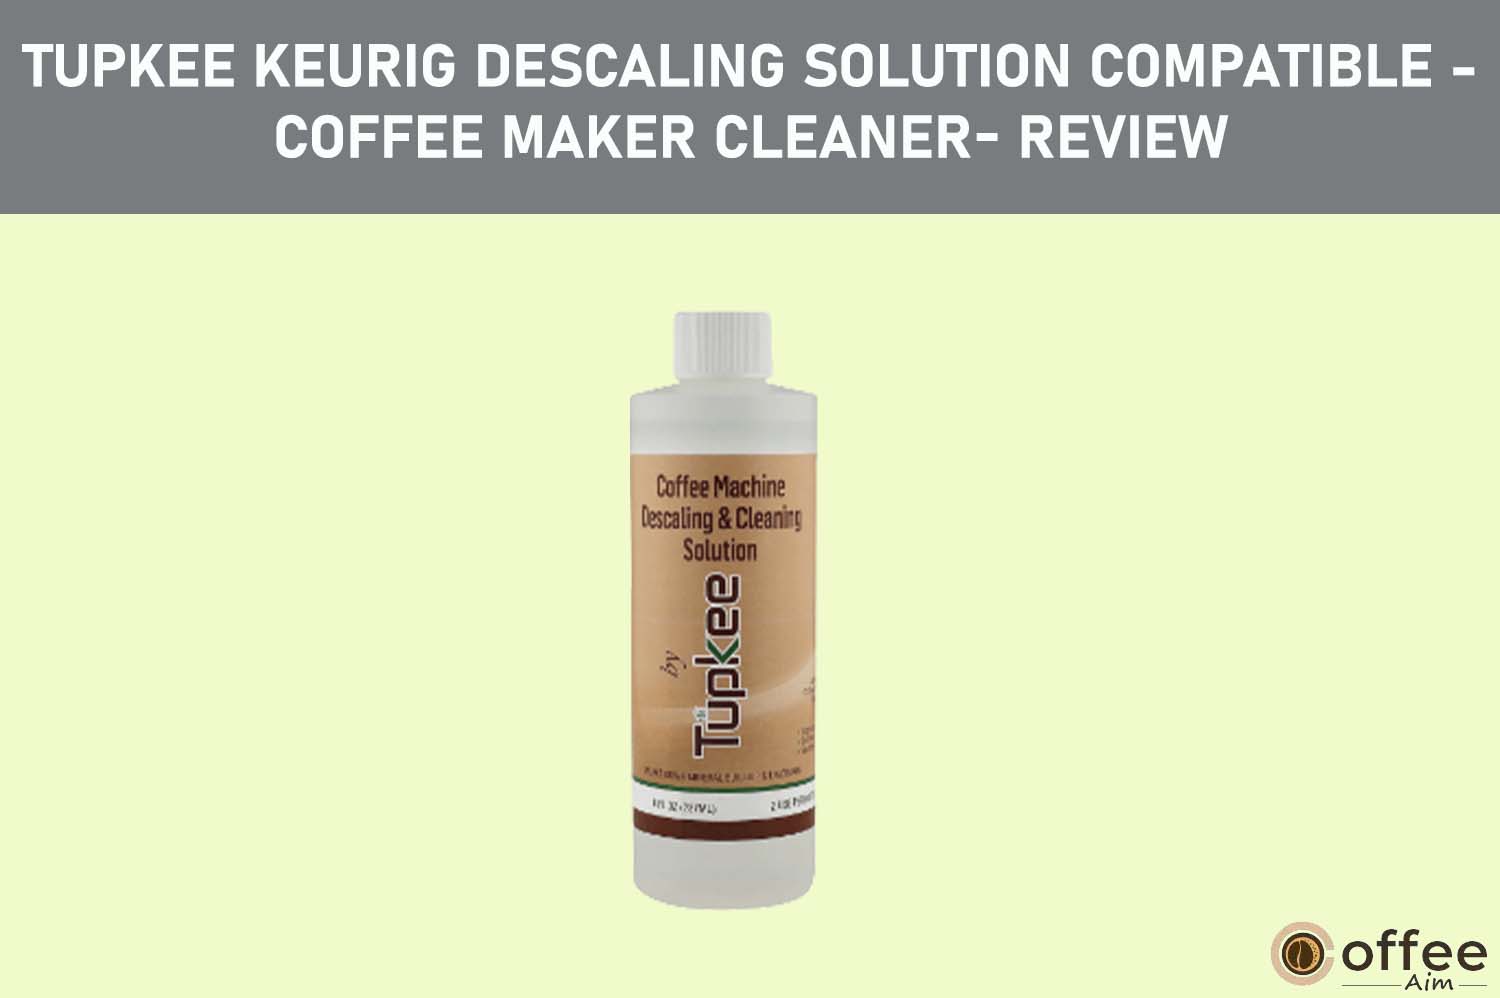 Featured image for the article "Tupkee Keurig Descaling Solution Compatible -Coffee Maker Cleaner- Review"